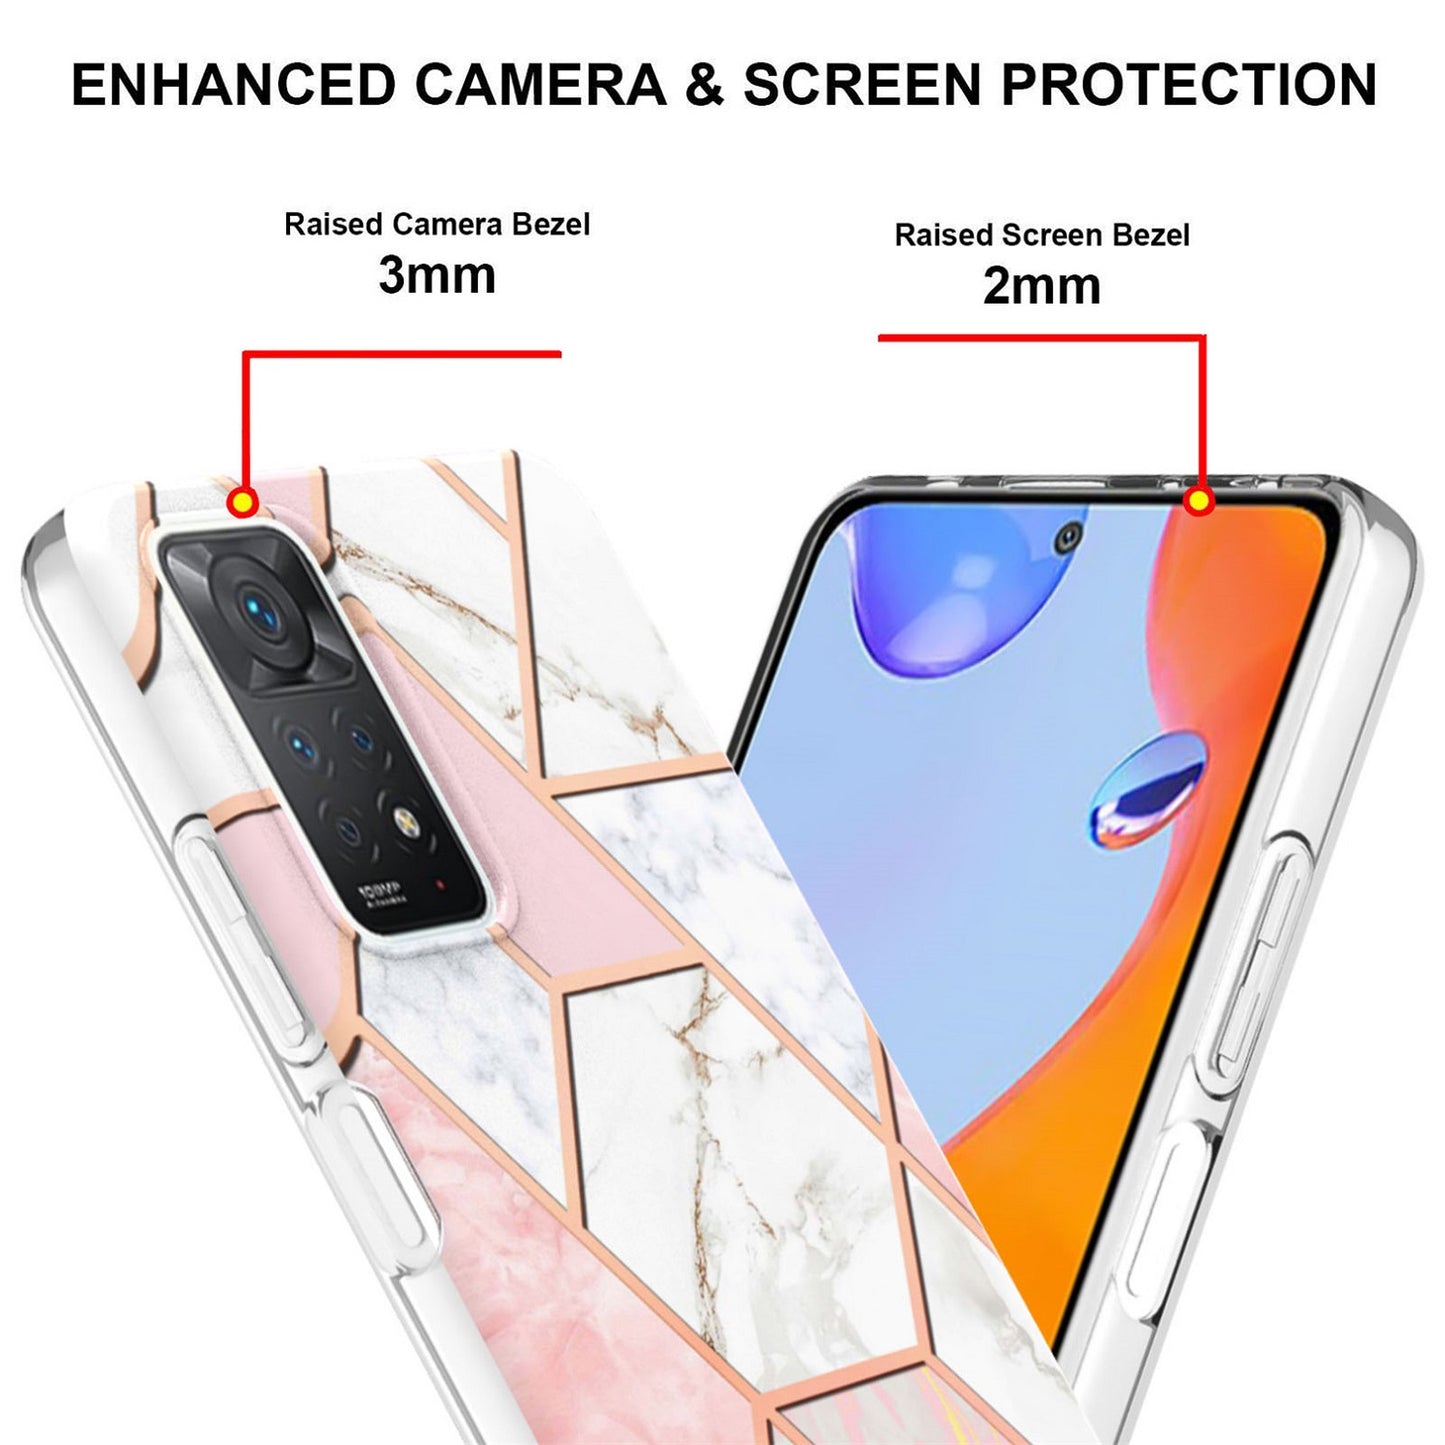 Exclusive Redmi note 11 Pro + 5G Case & cover (Geo Pink)